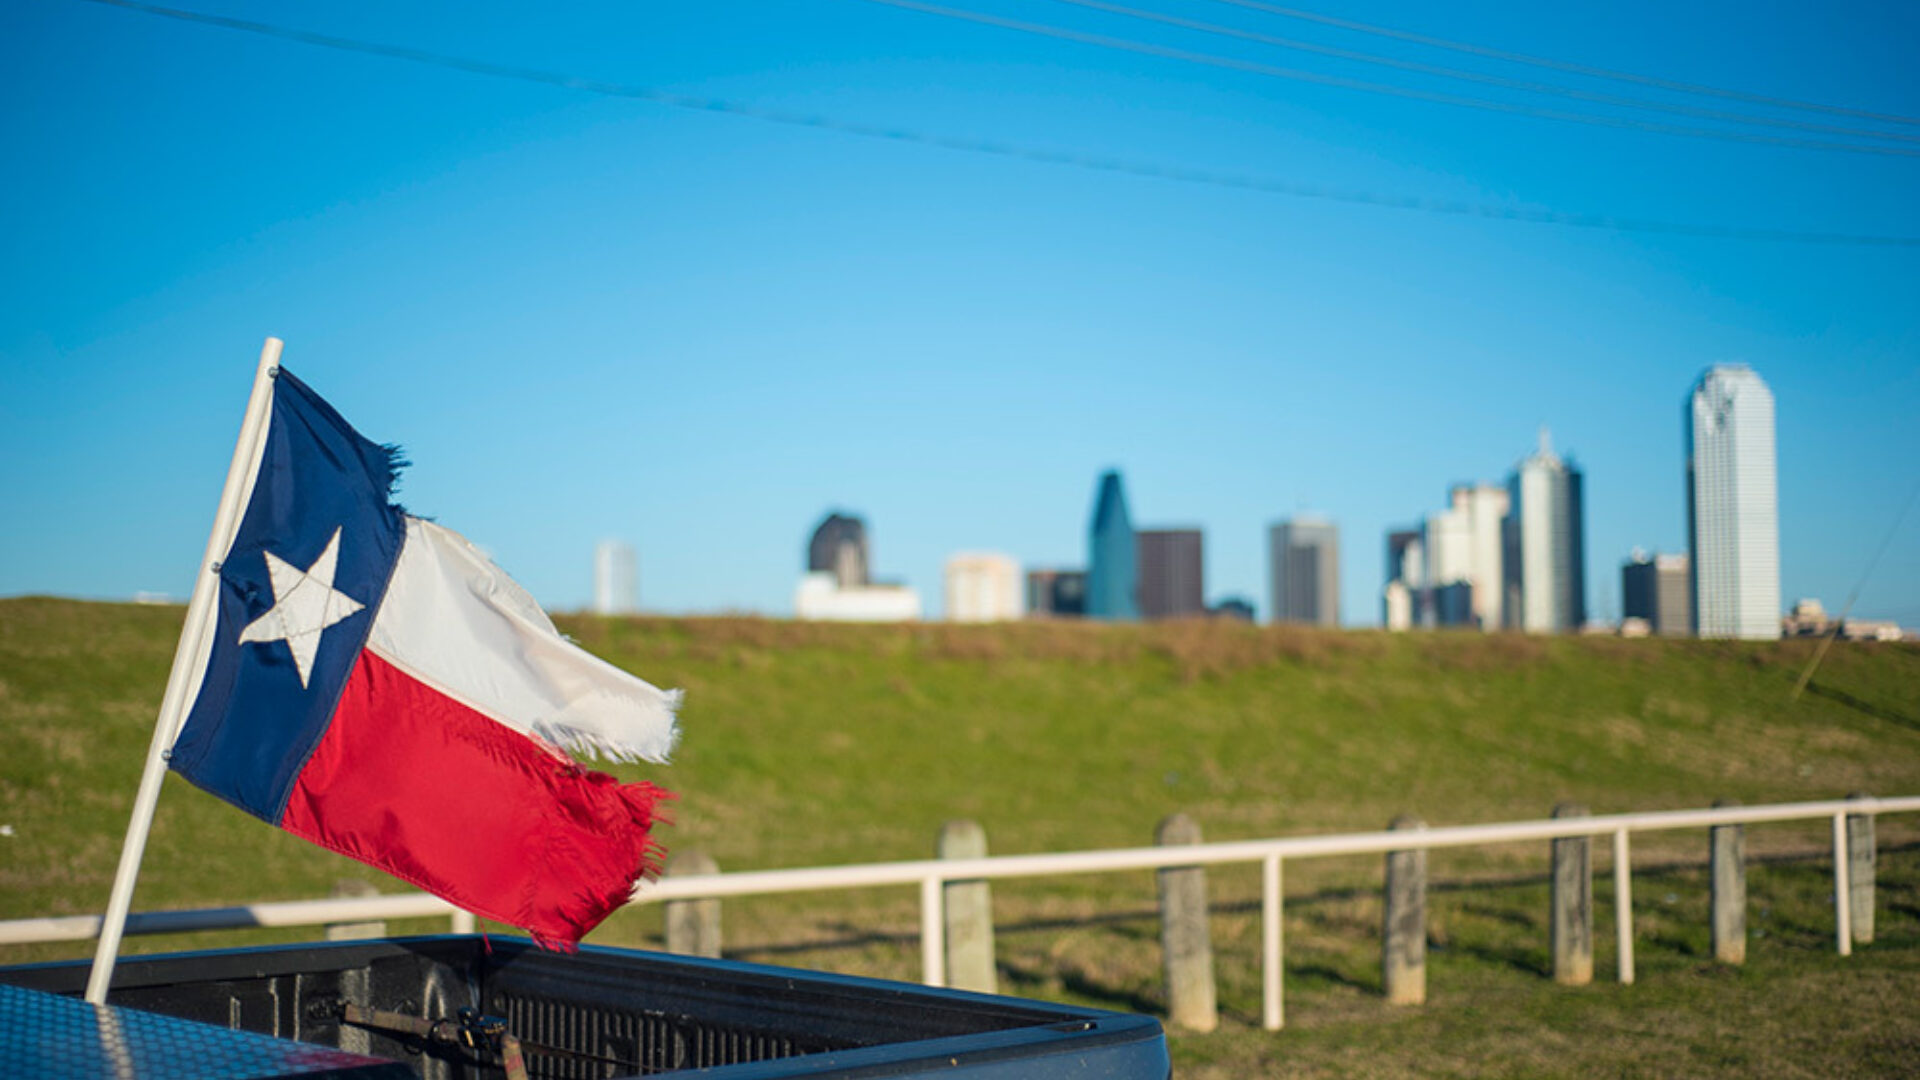 Texas flag with Dallas skyline in the background